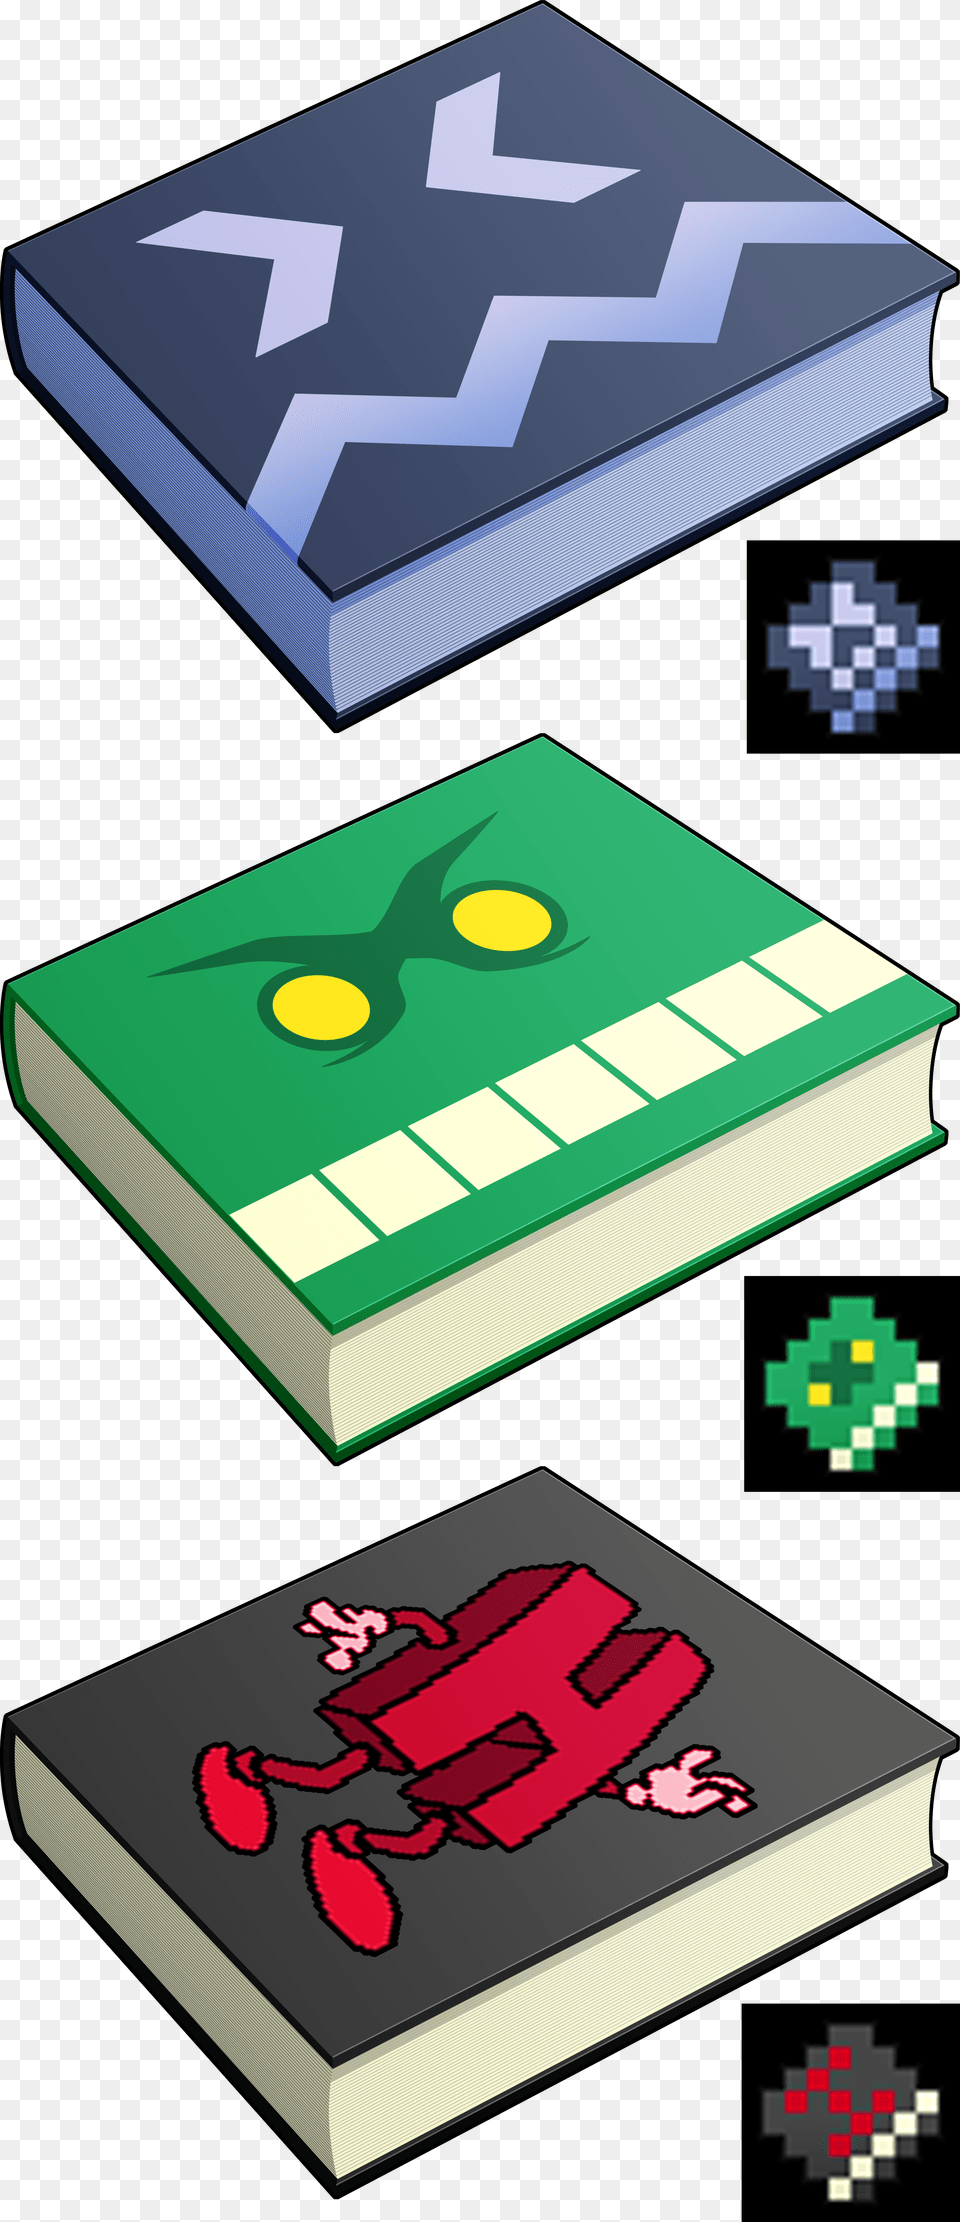 Rotmg Graphic Design Png Image